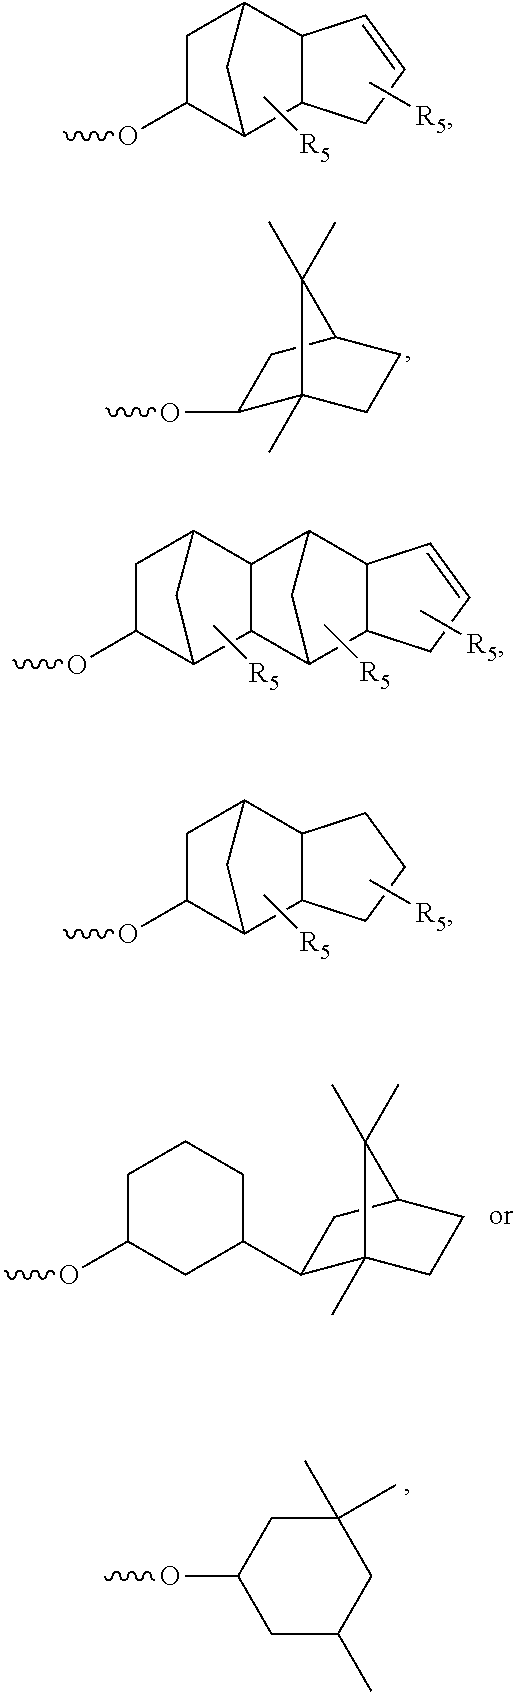 Thermosetting adhesive compositions